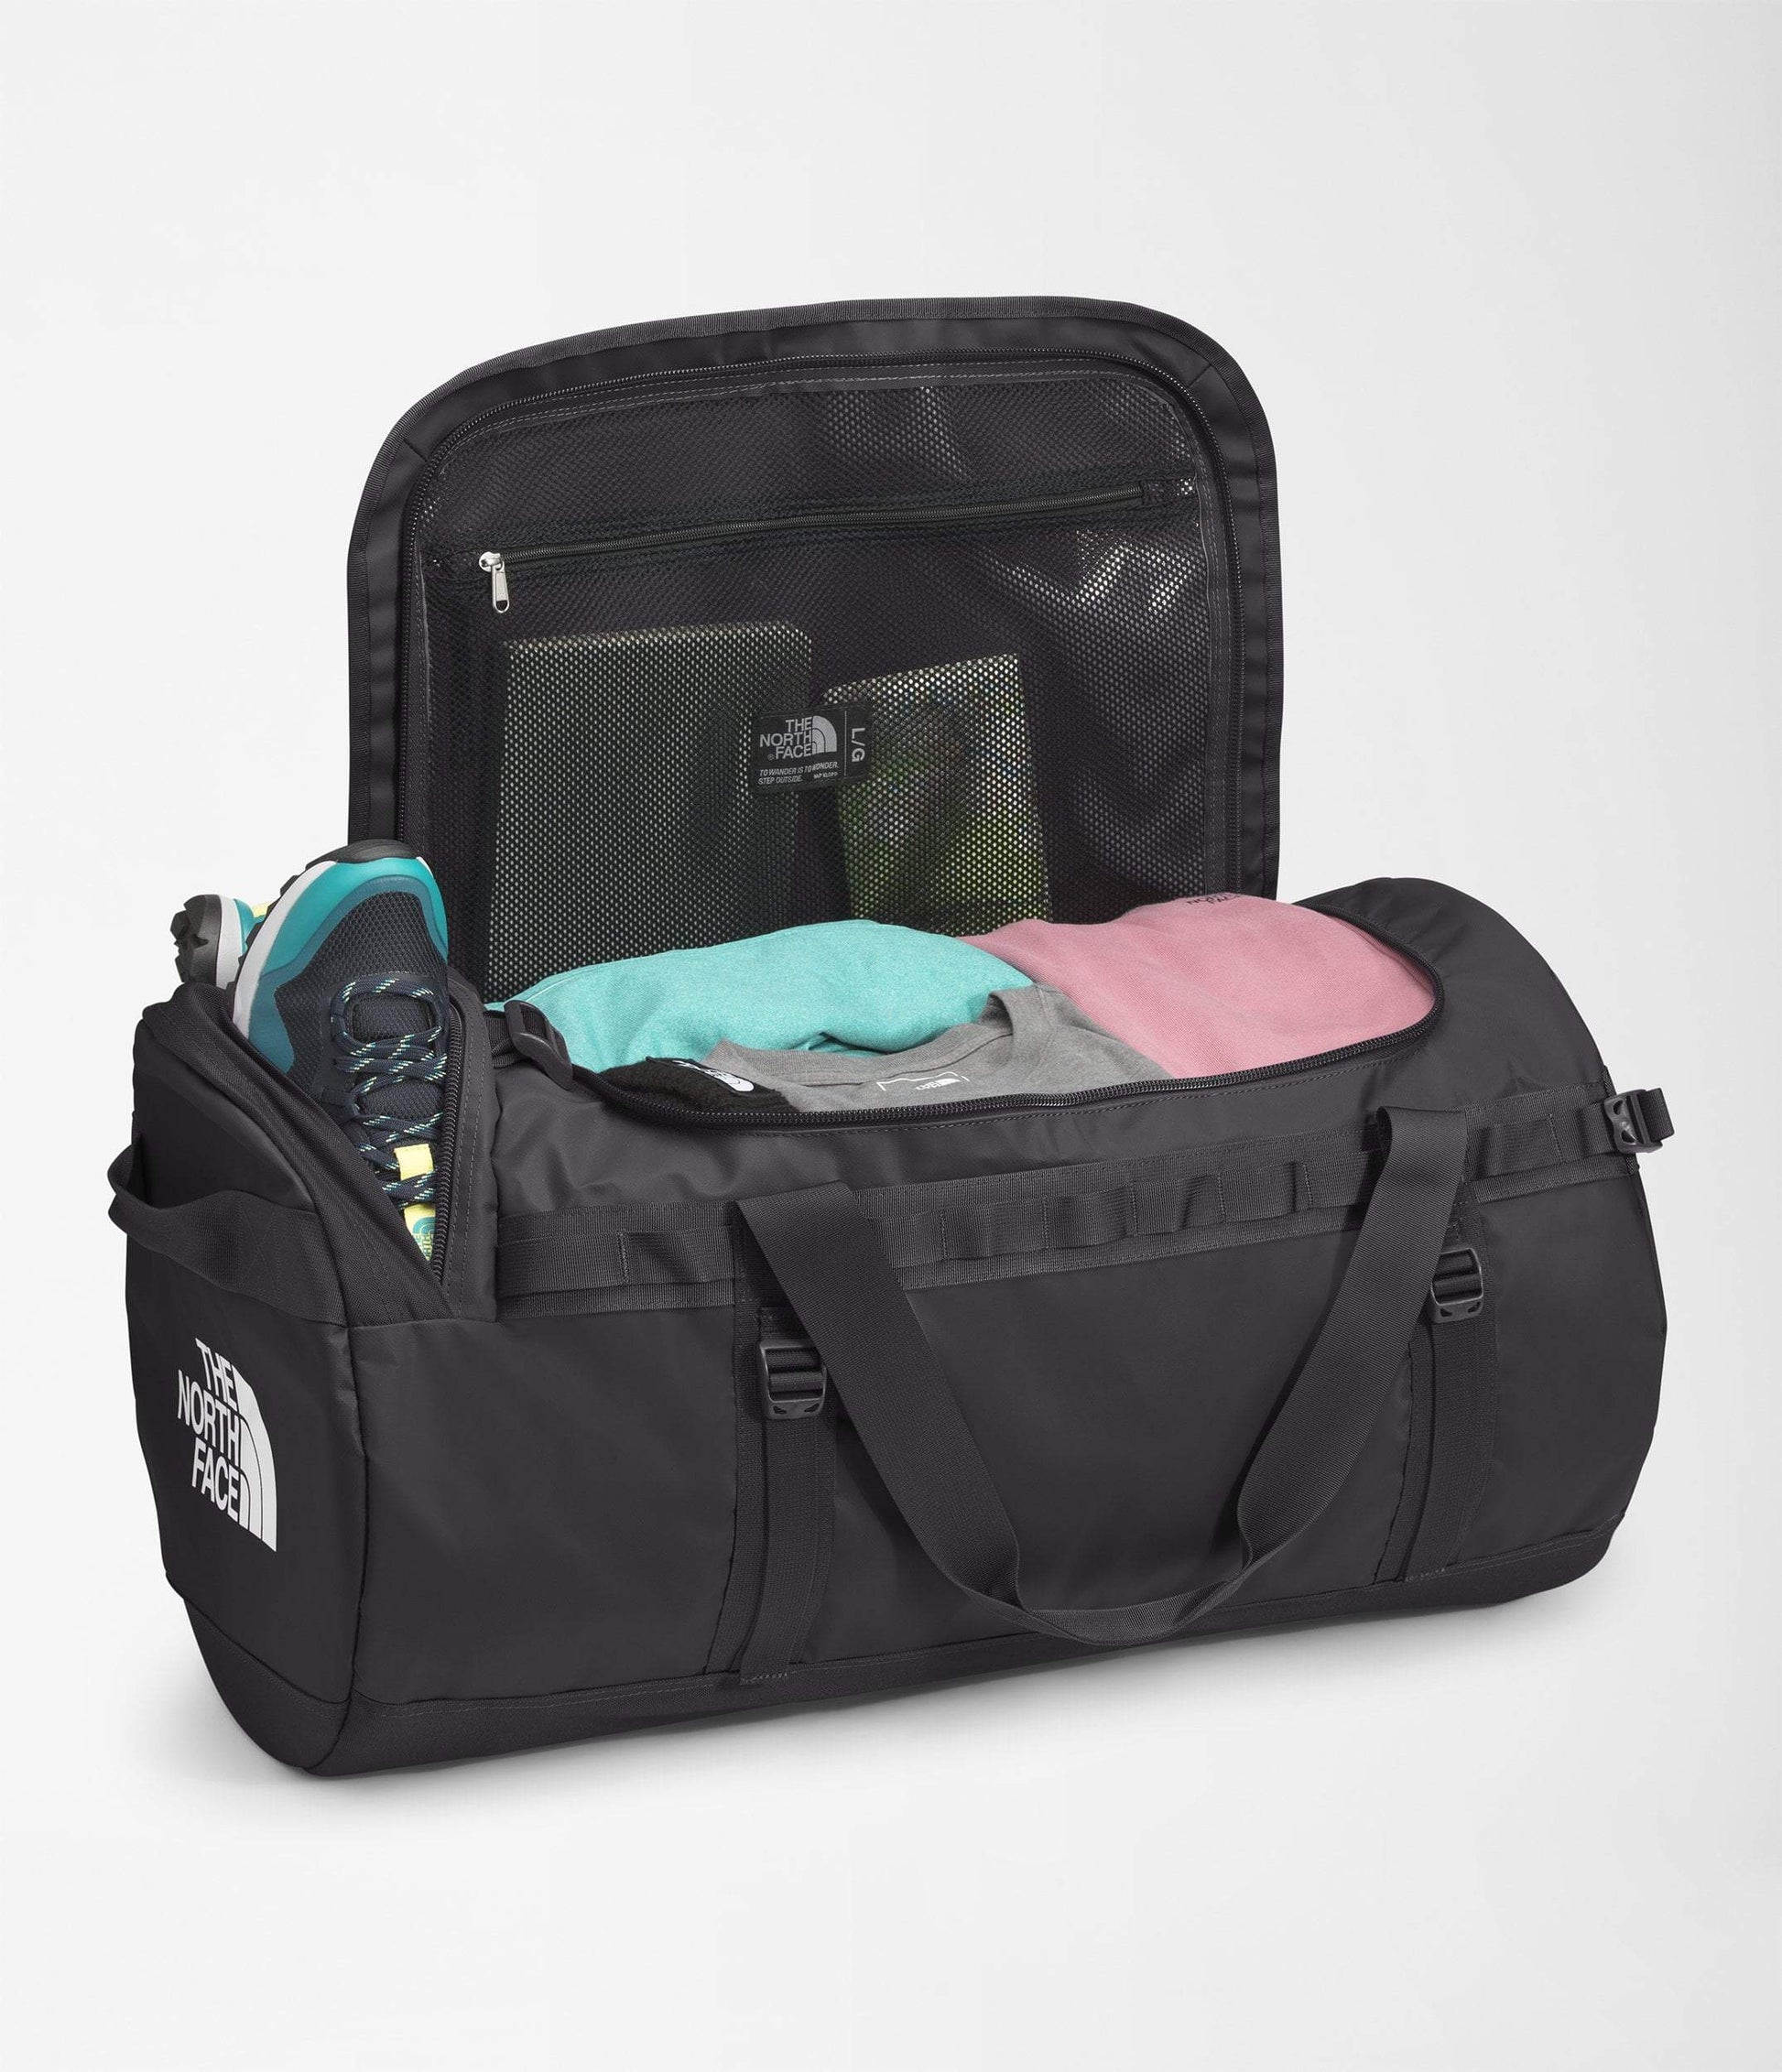 The North Face Base Camp Duffel - L